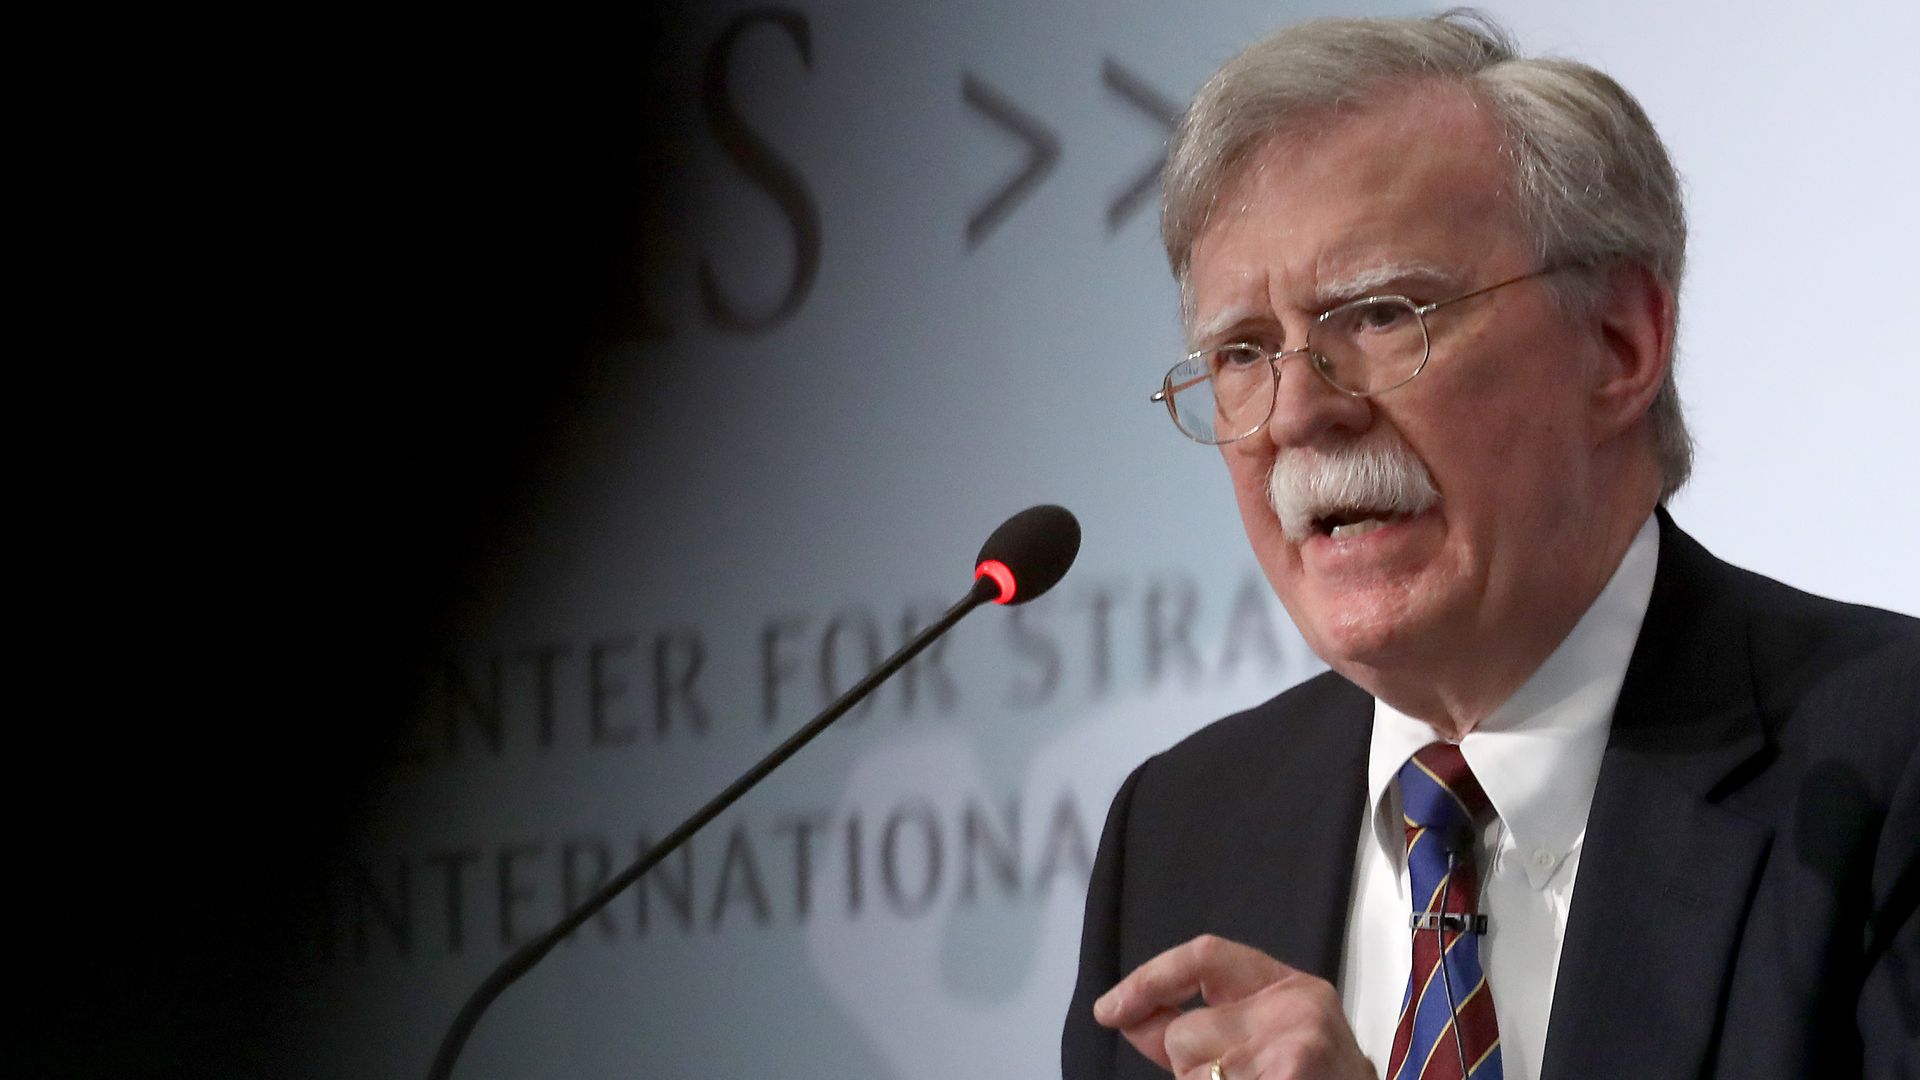 In this image, Bolton speaks into a microphone while wearing glasses.